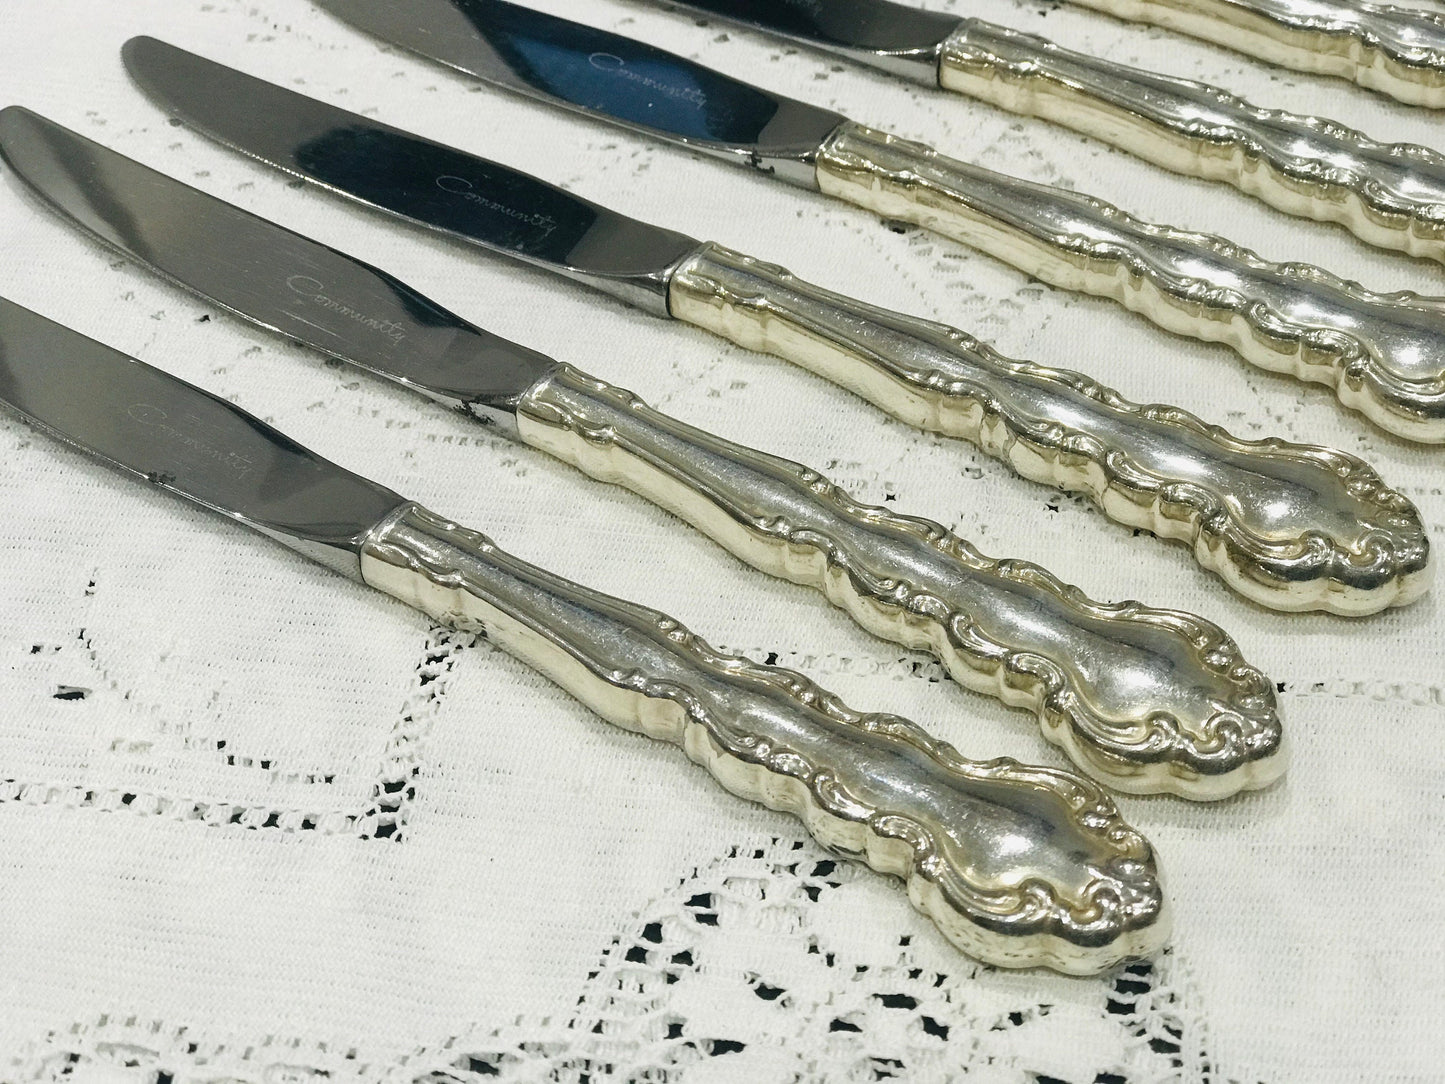 8 Starter/Salad Knives Community Mansion House Oneida Silver Service Cutlery Traditional Quality Stainless Steel Silver Plate Stamped